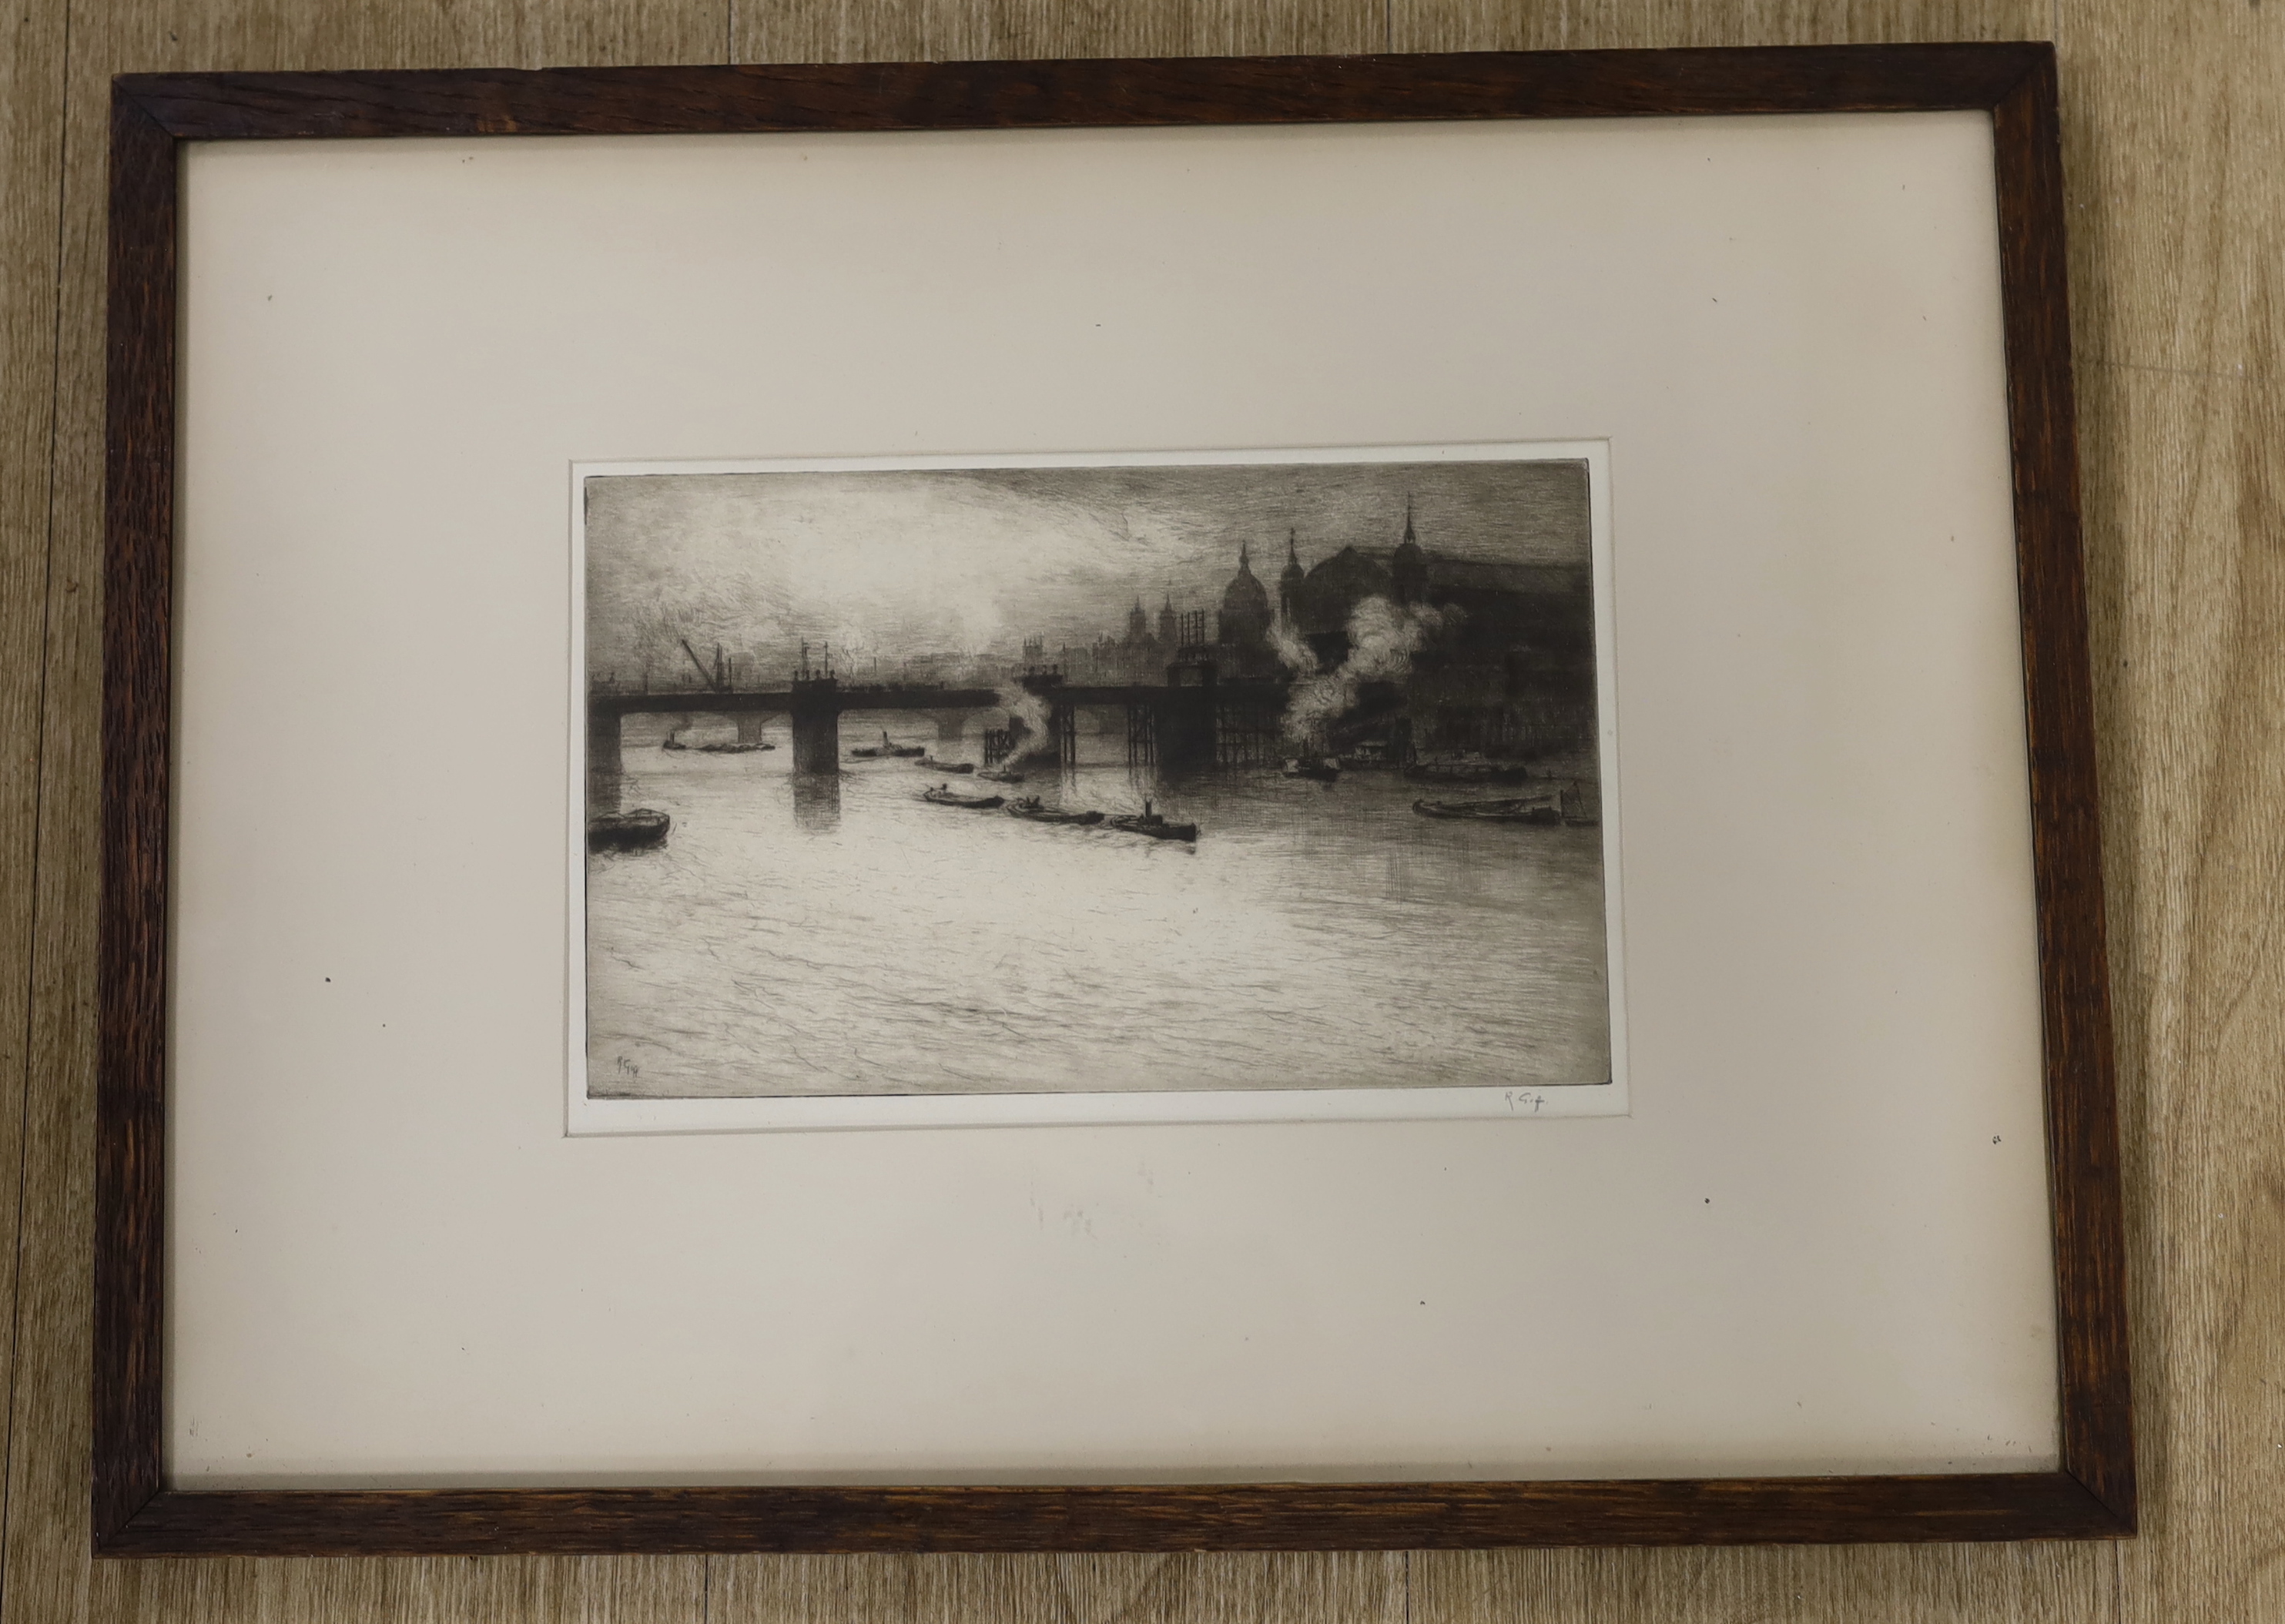 Robert Charles Goff (1837-1922), etching, 'Boats on the river Thames, Charing Cross', signed in pencil, label verso, 27 x 18cm